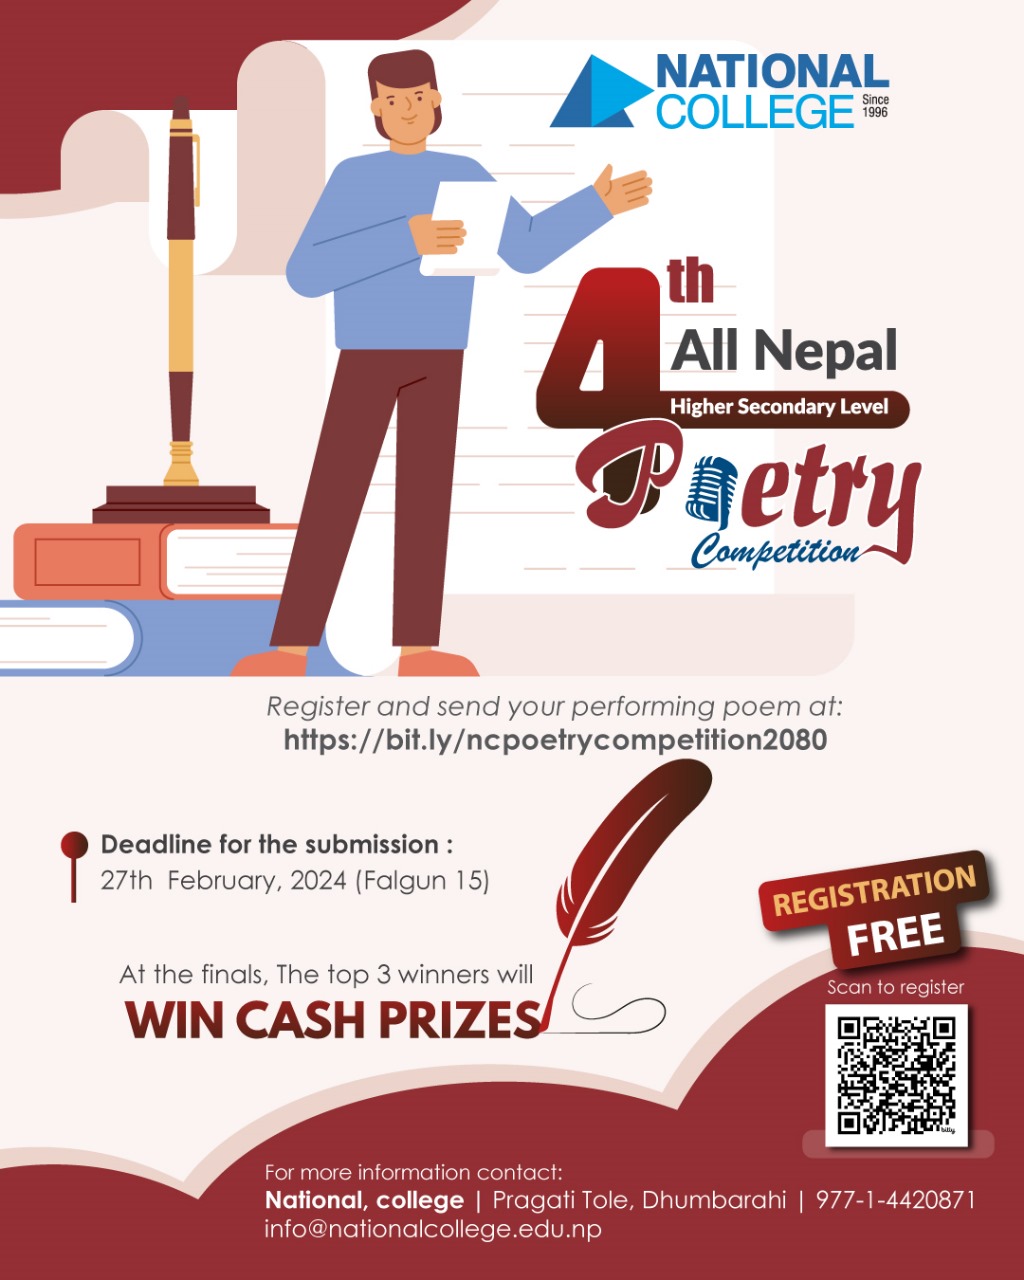 4th All Nepal Poetry Competition